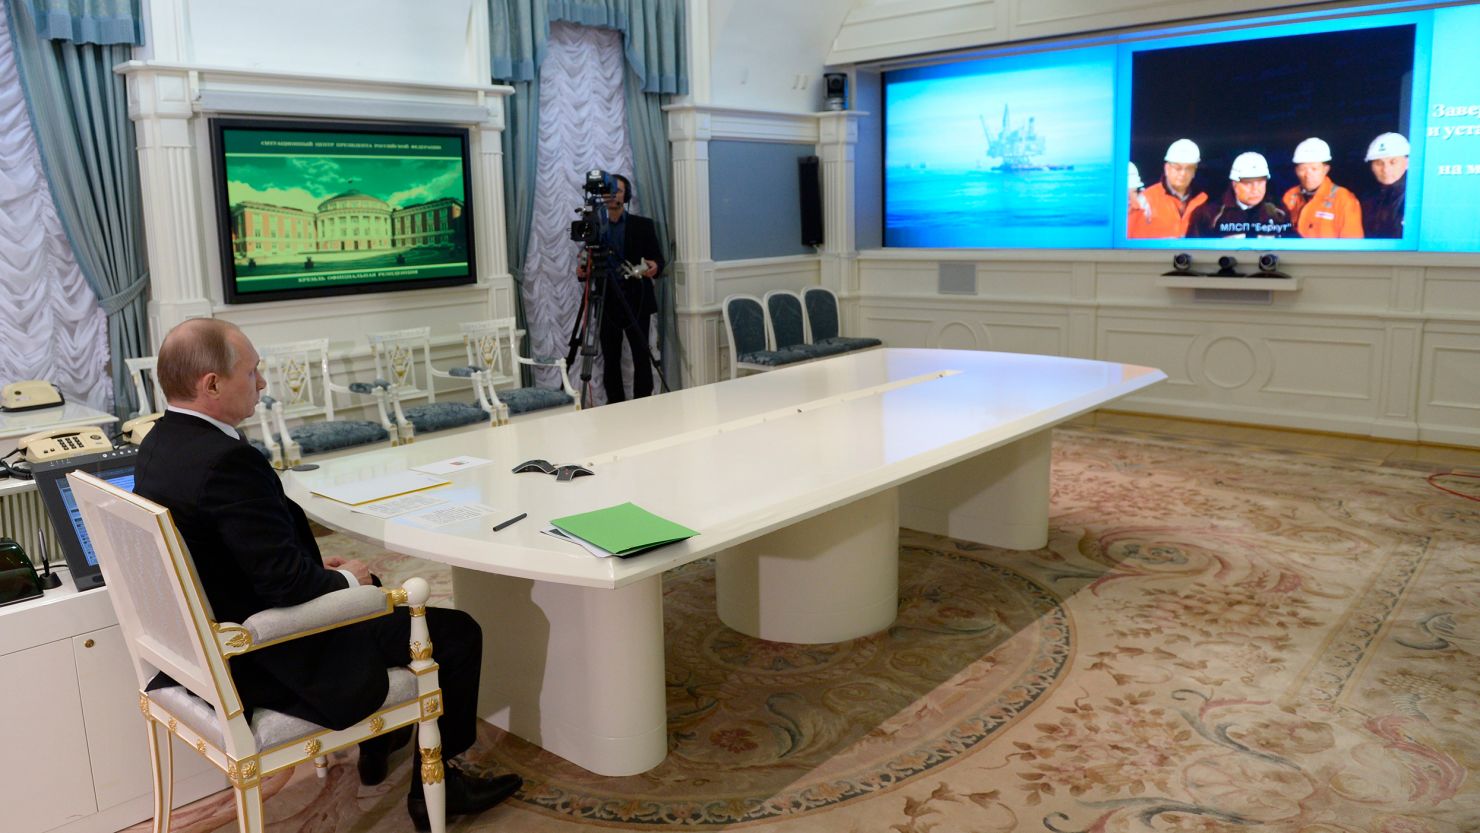 Russian President Vladimir Putin has a video conference with the Berkut offshore drilling platform launched in the Sea of Okhotsk as part of the Sakhalin-1 oil and gas project, in Moscow, Russia, Friday, June 27, 2014.